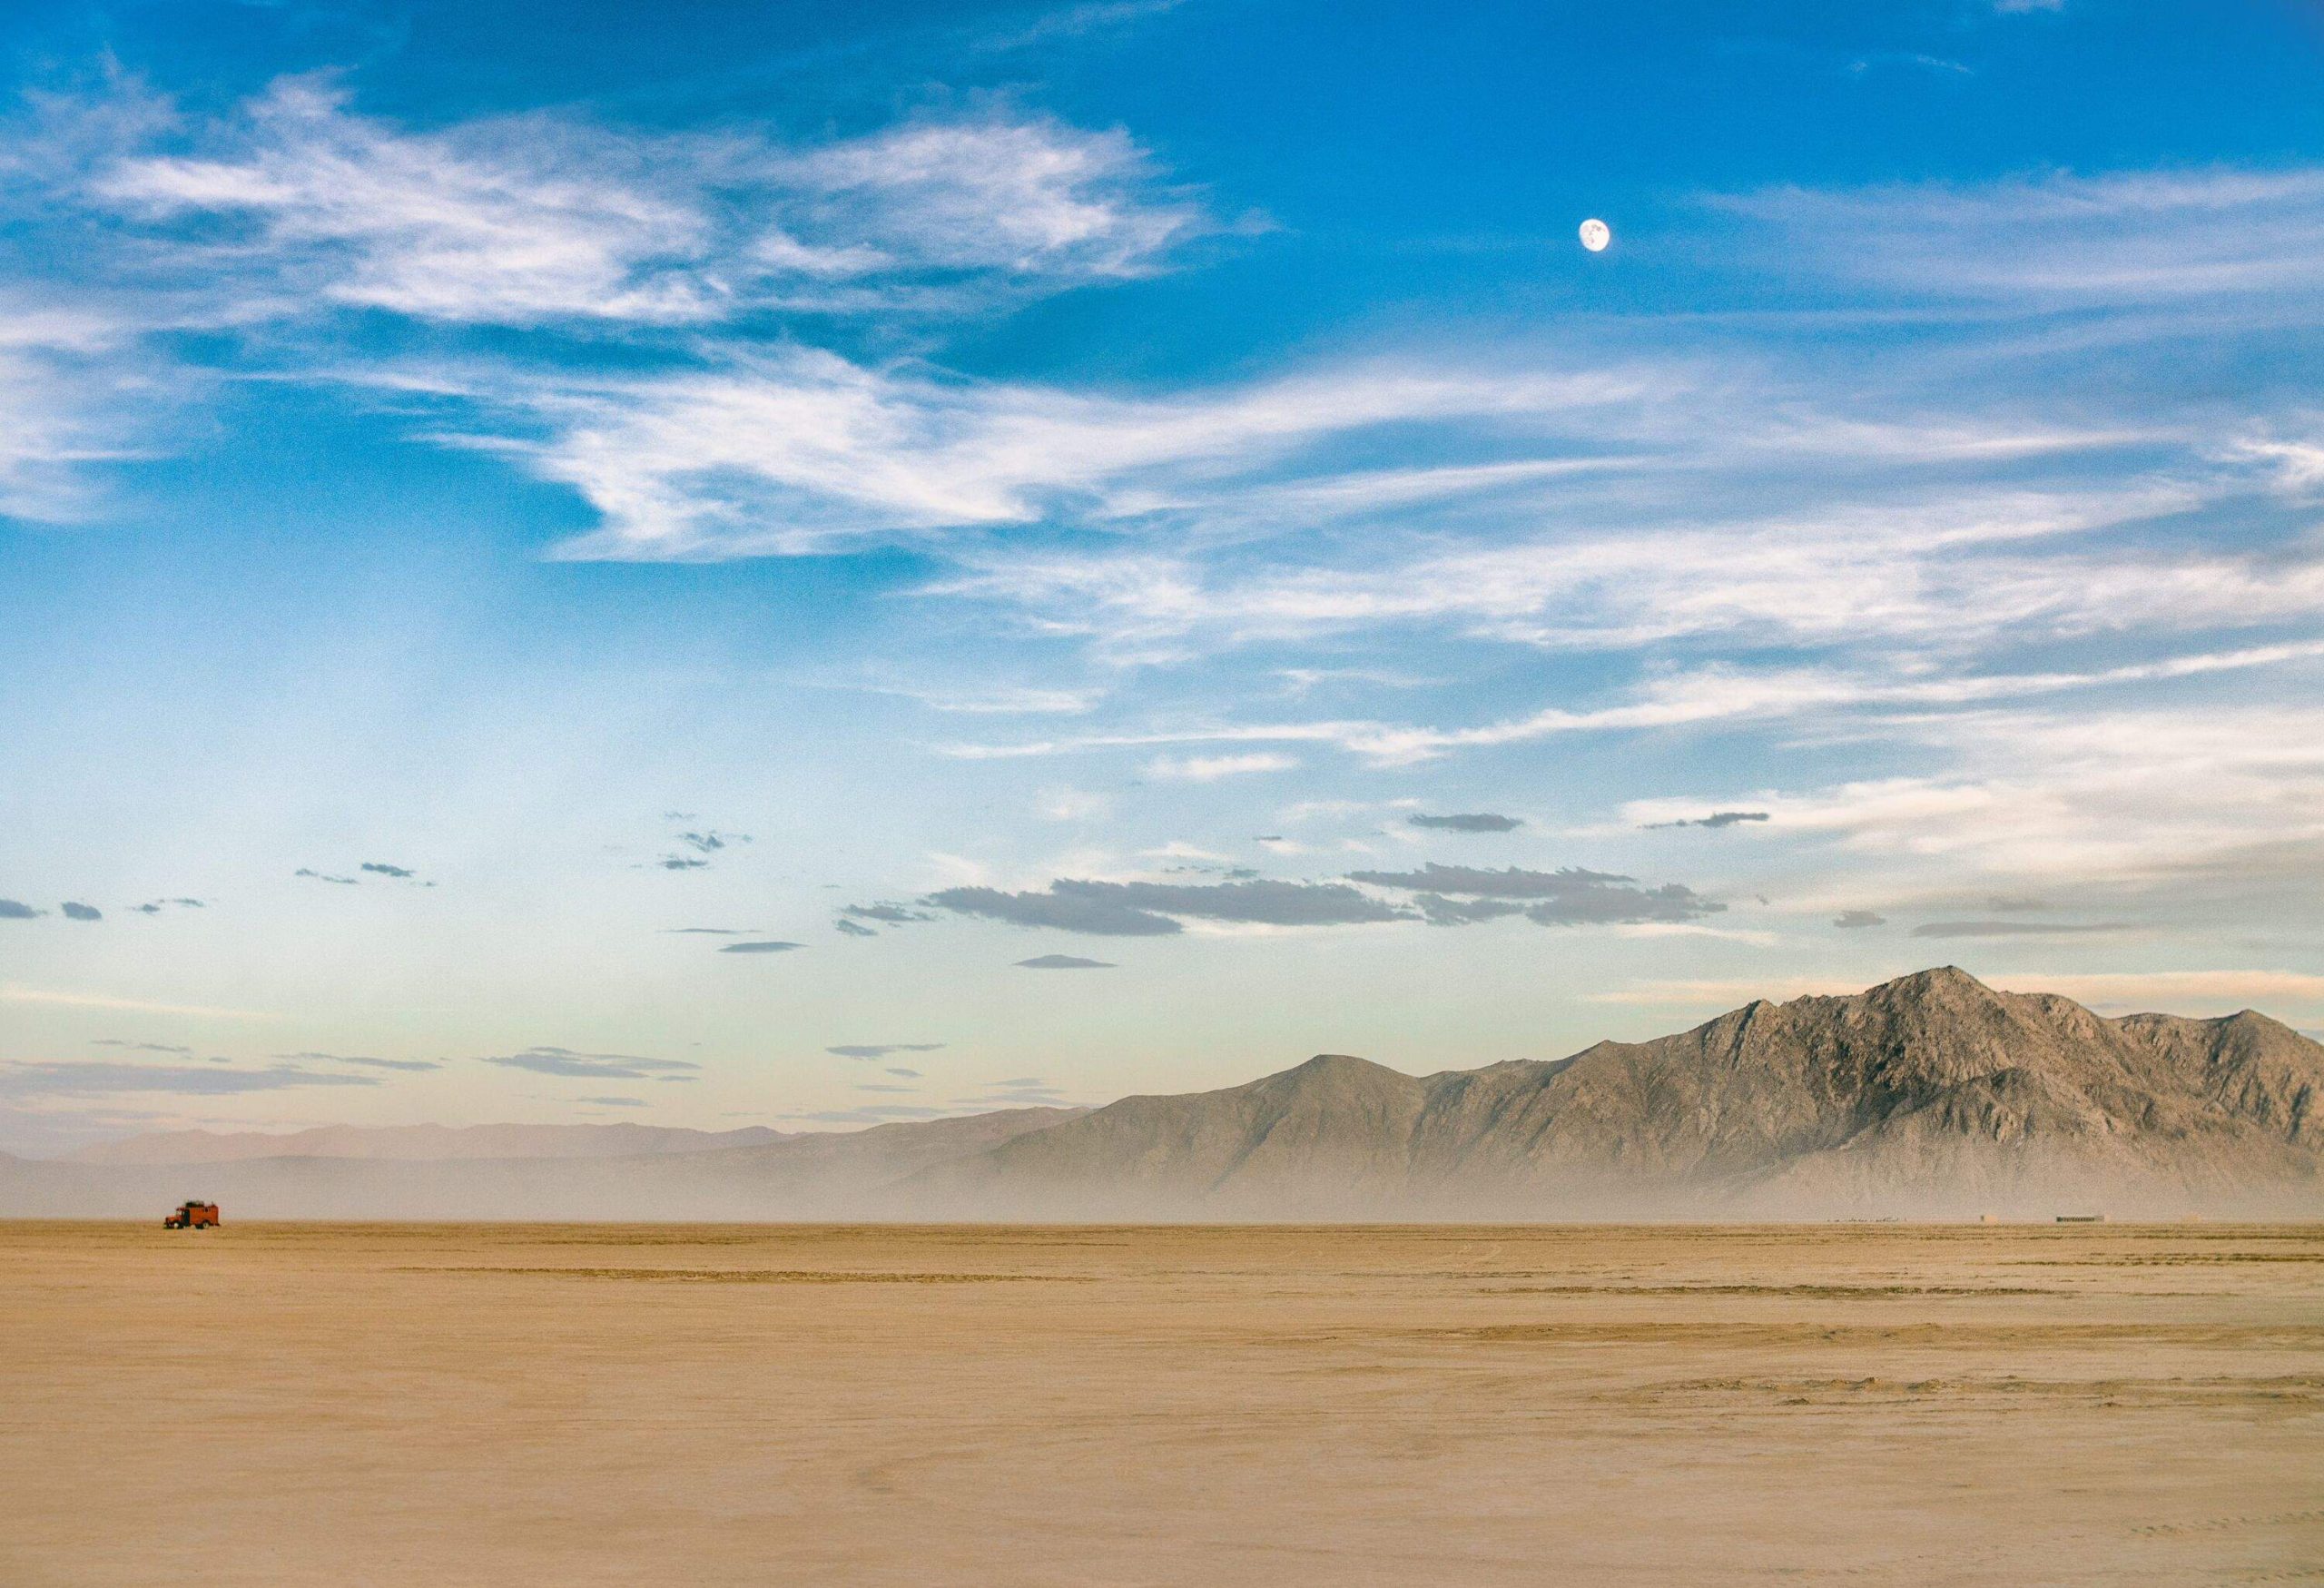 The black rock desert in Nevada is famous for its Burning Man festival